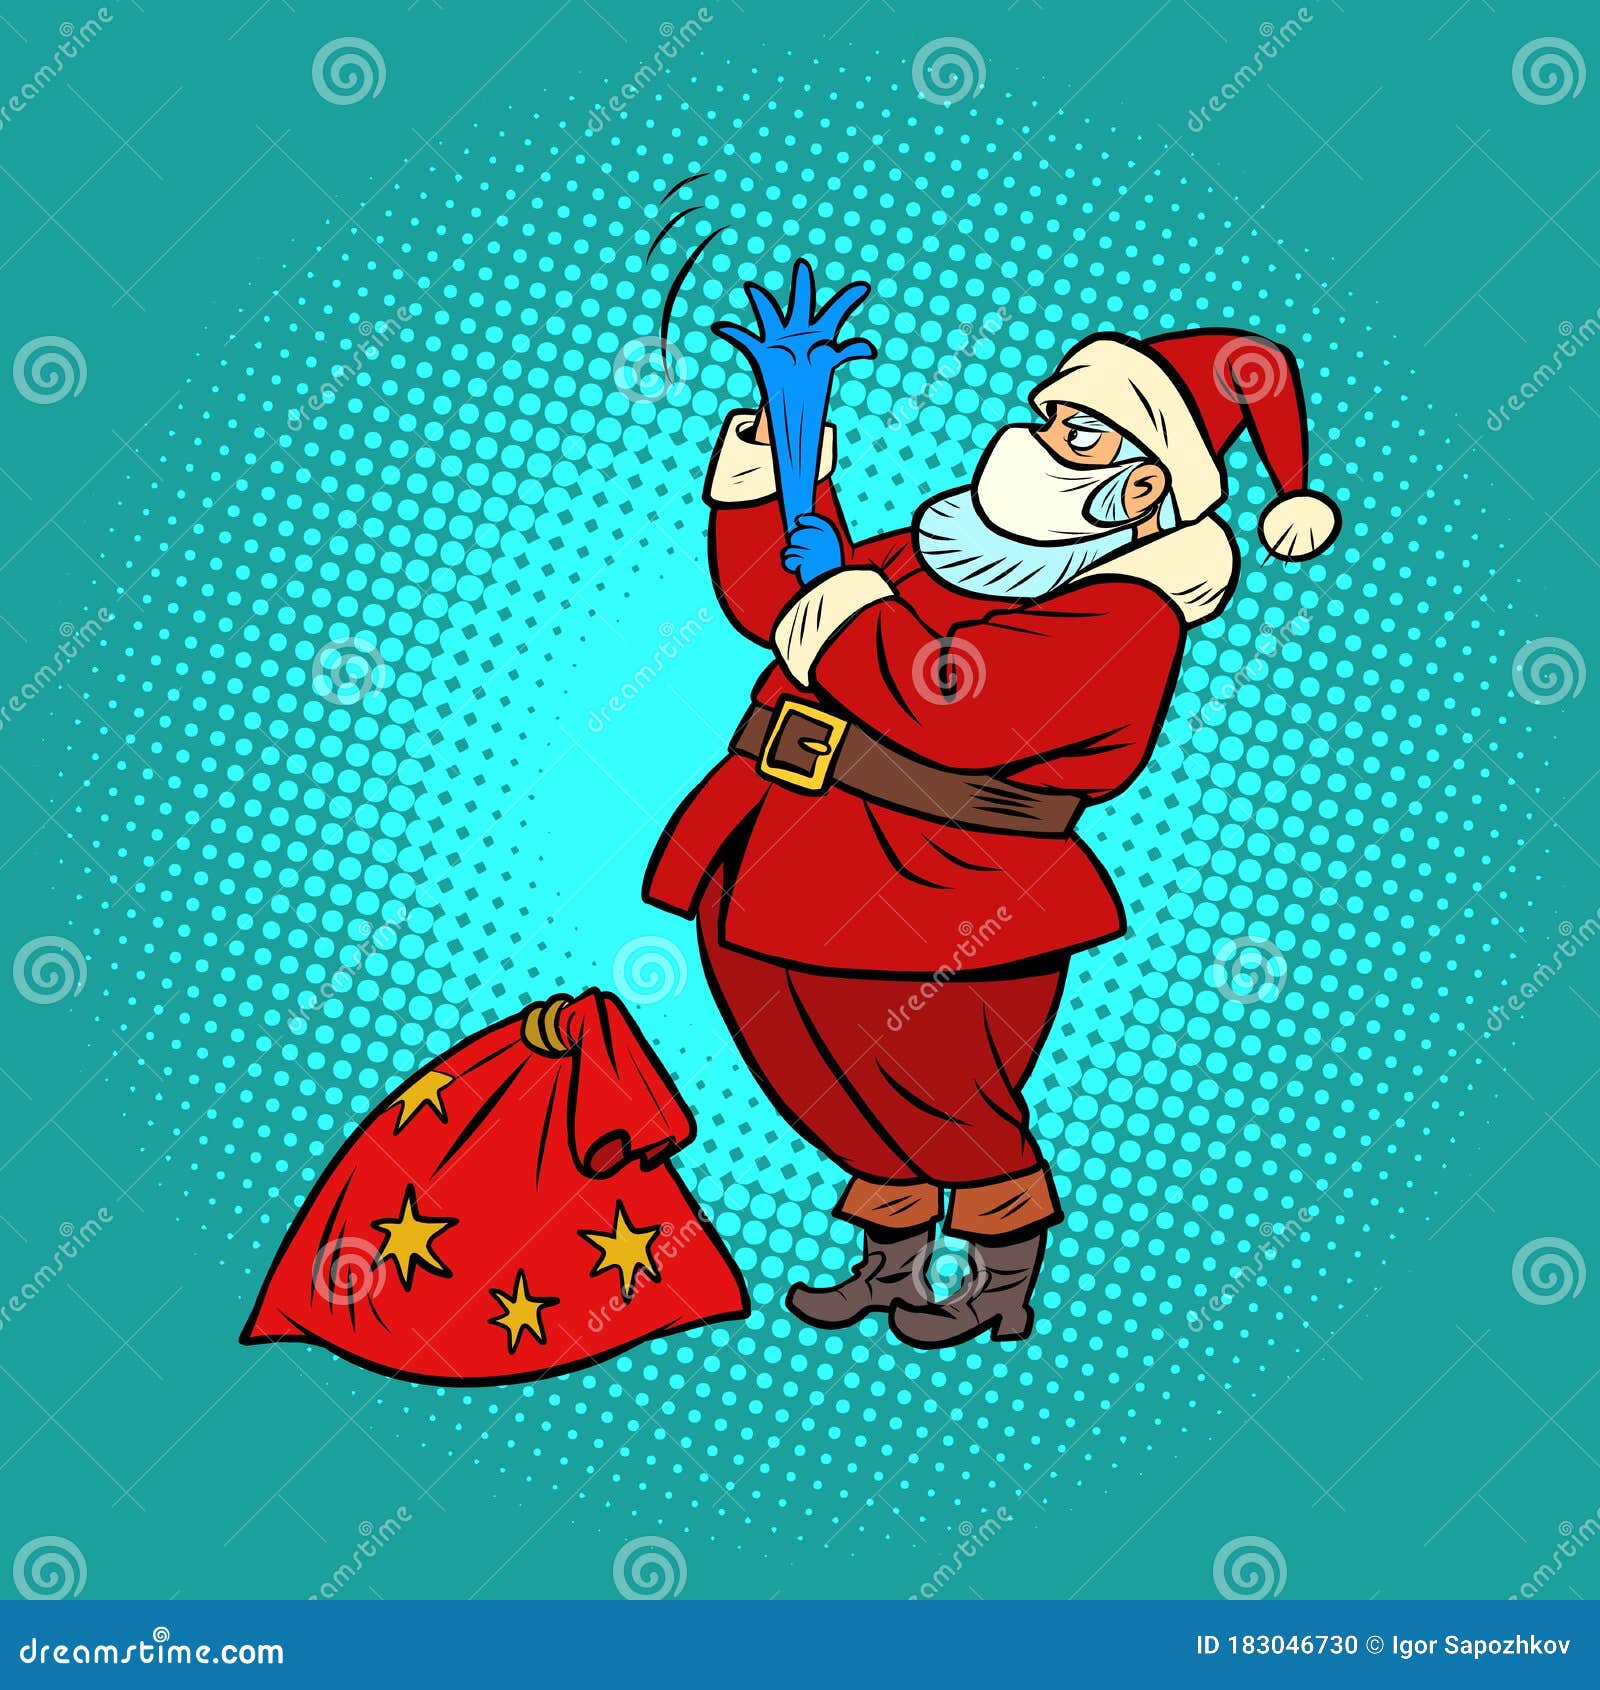 Santa Claus In A Medical Mask. New Year And Christmas During The Epidemic Stock Vector ...